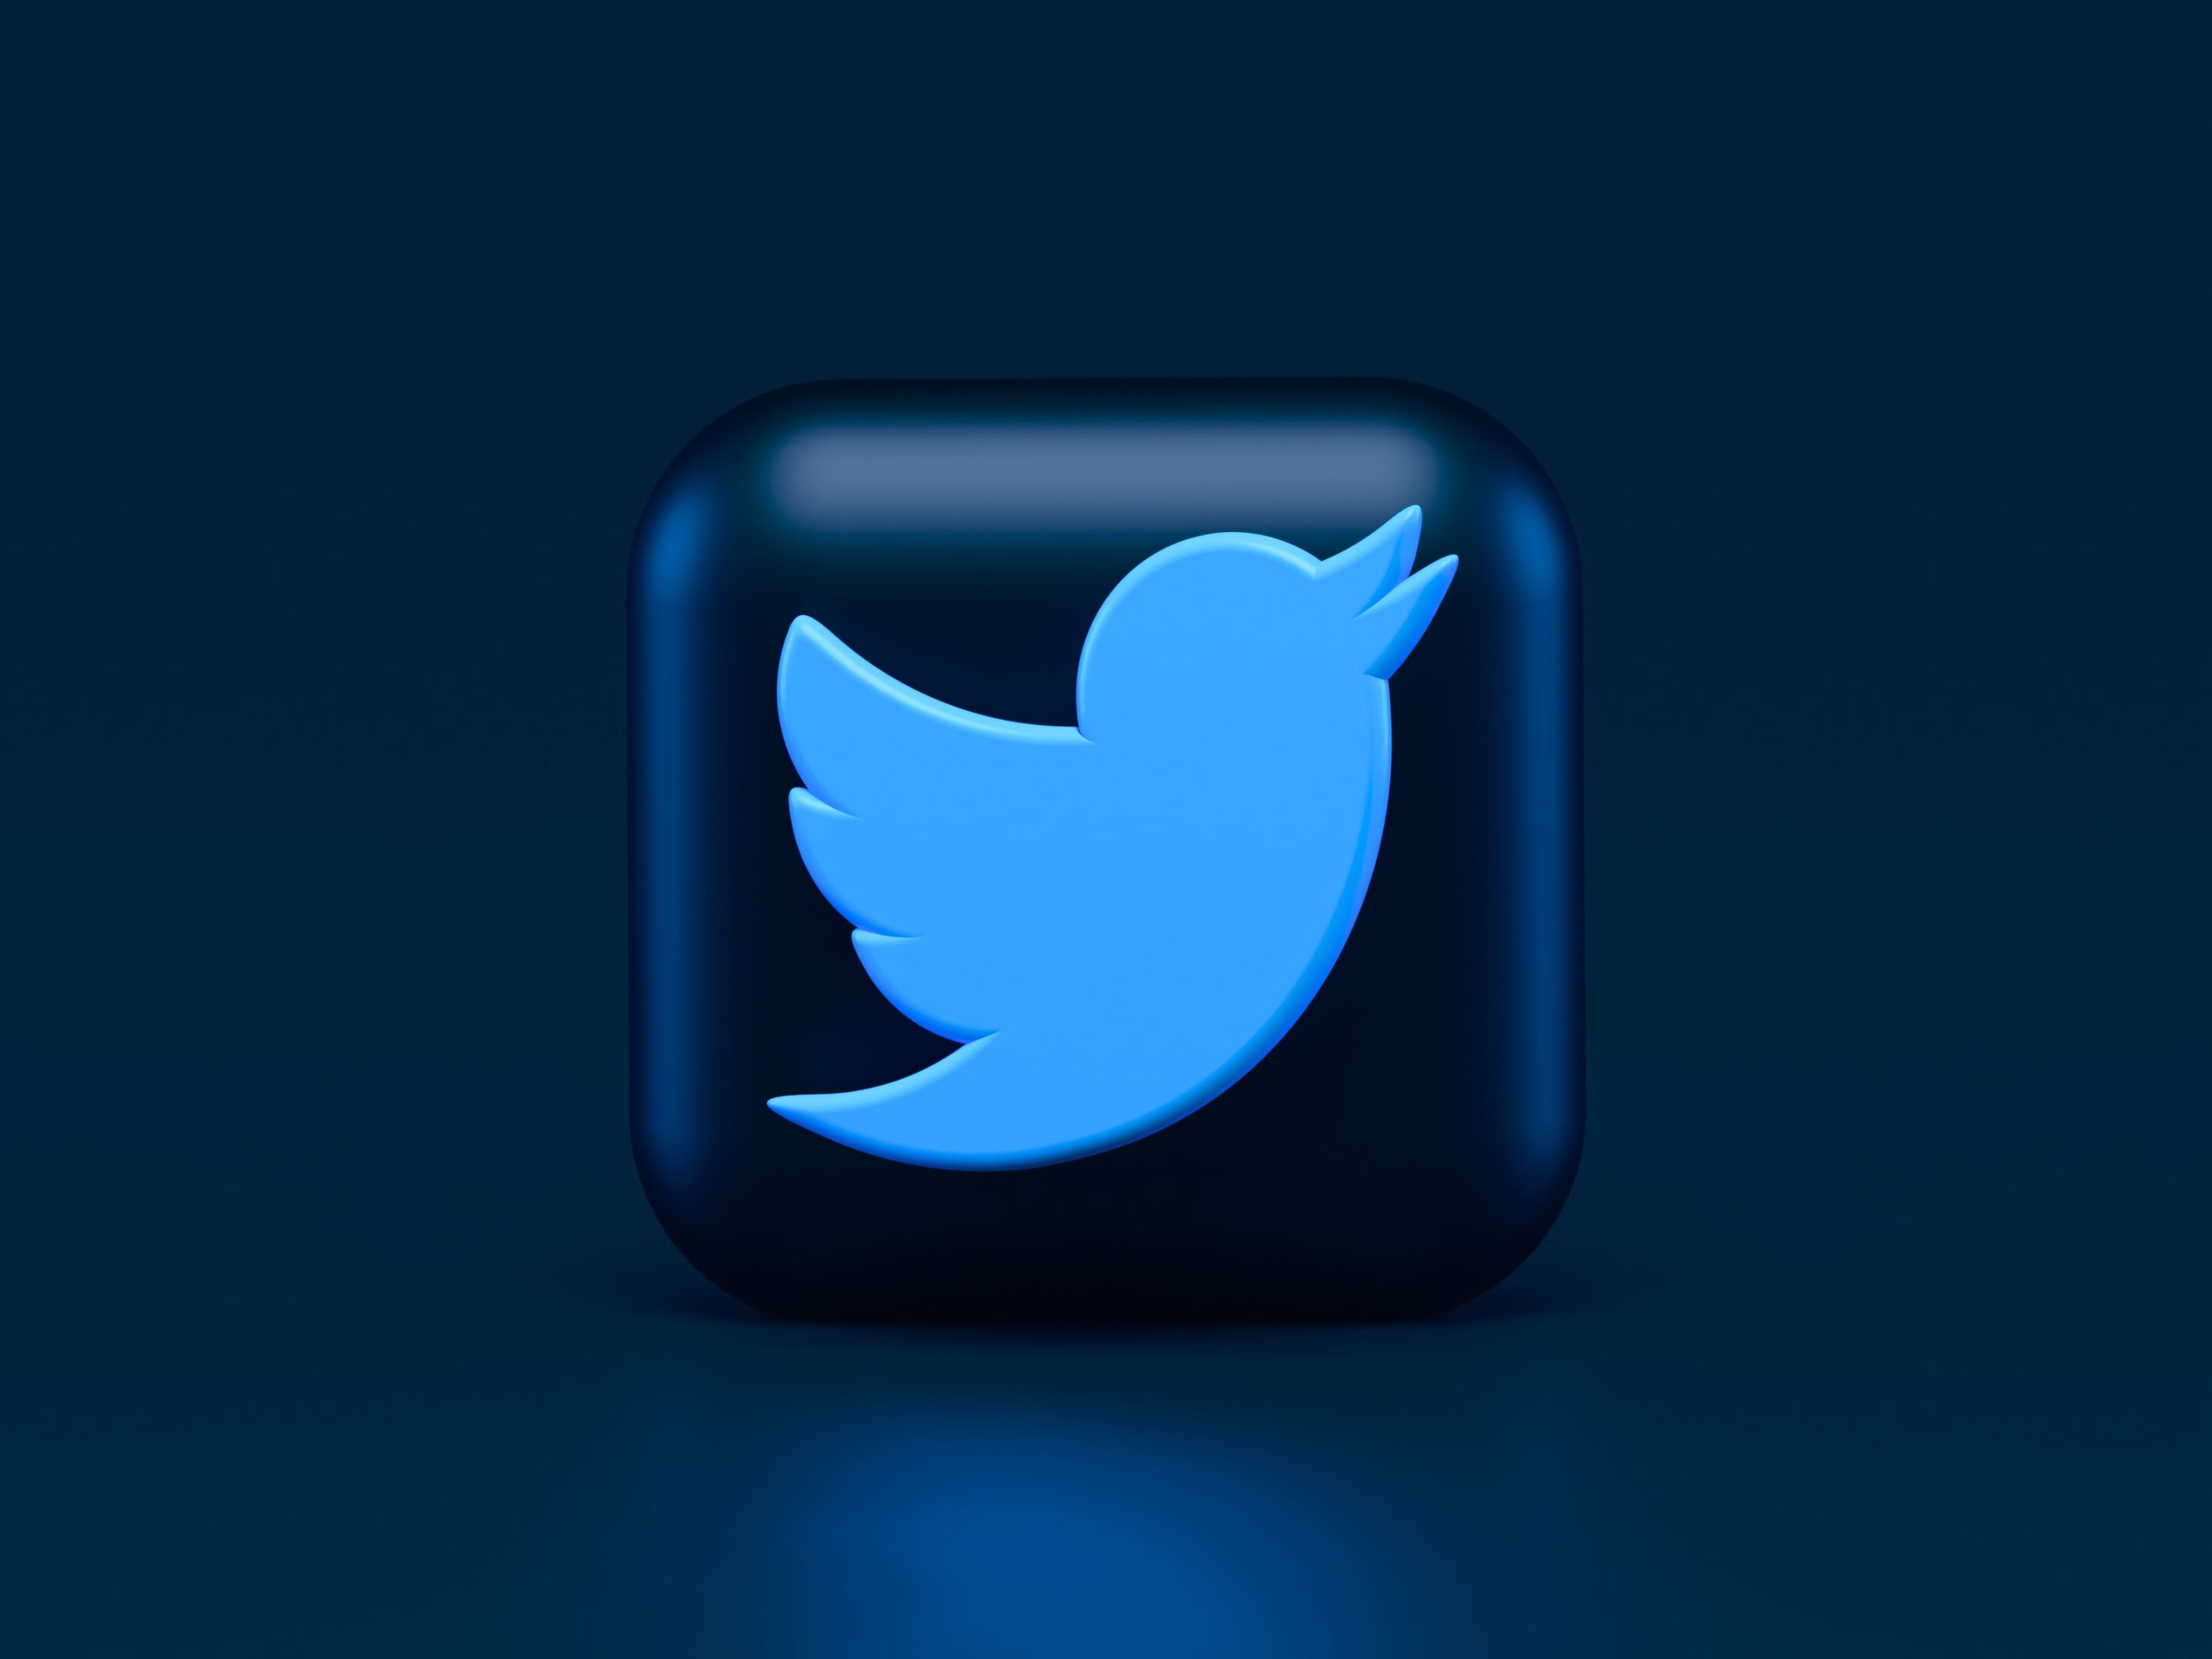 The potentially adverse impact of Twitter 2.0 on scientific and research communication